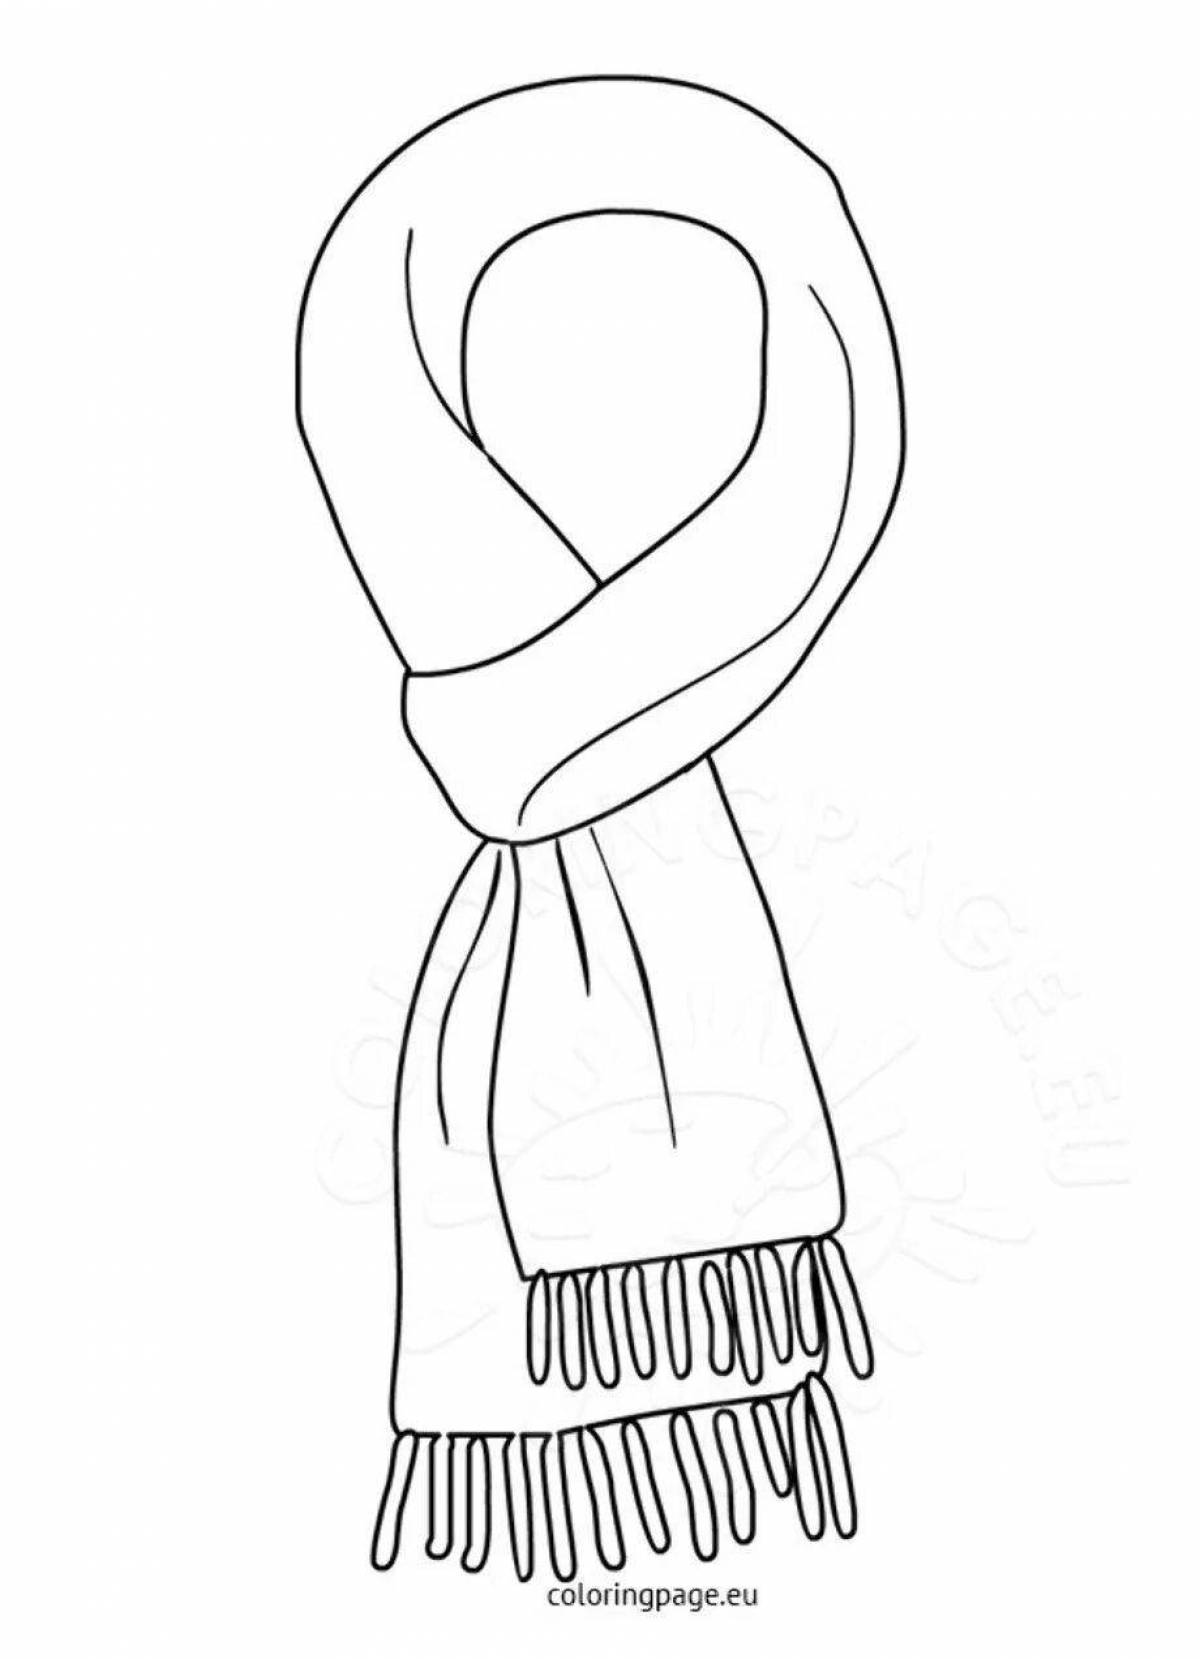 Coloring bright scarf for children